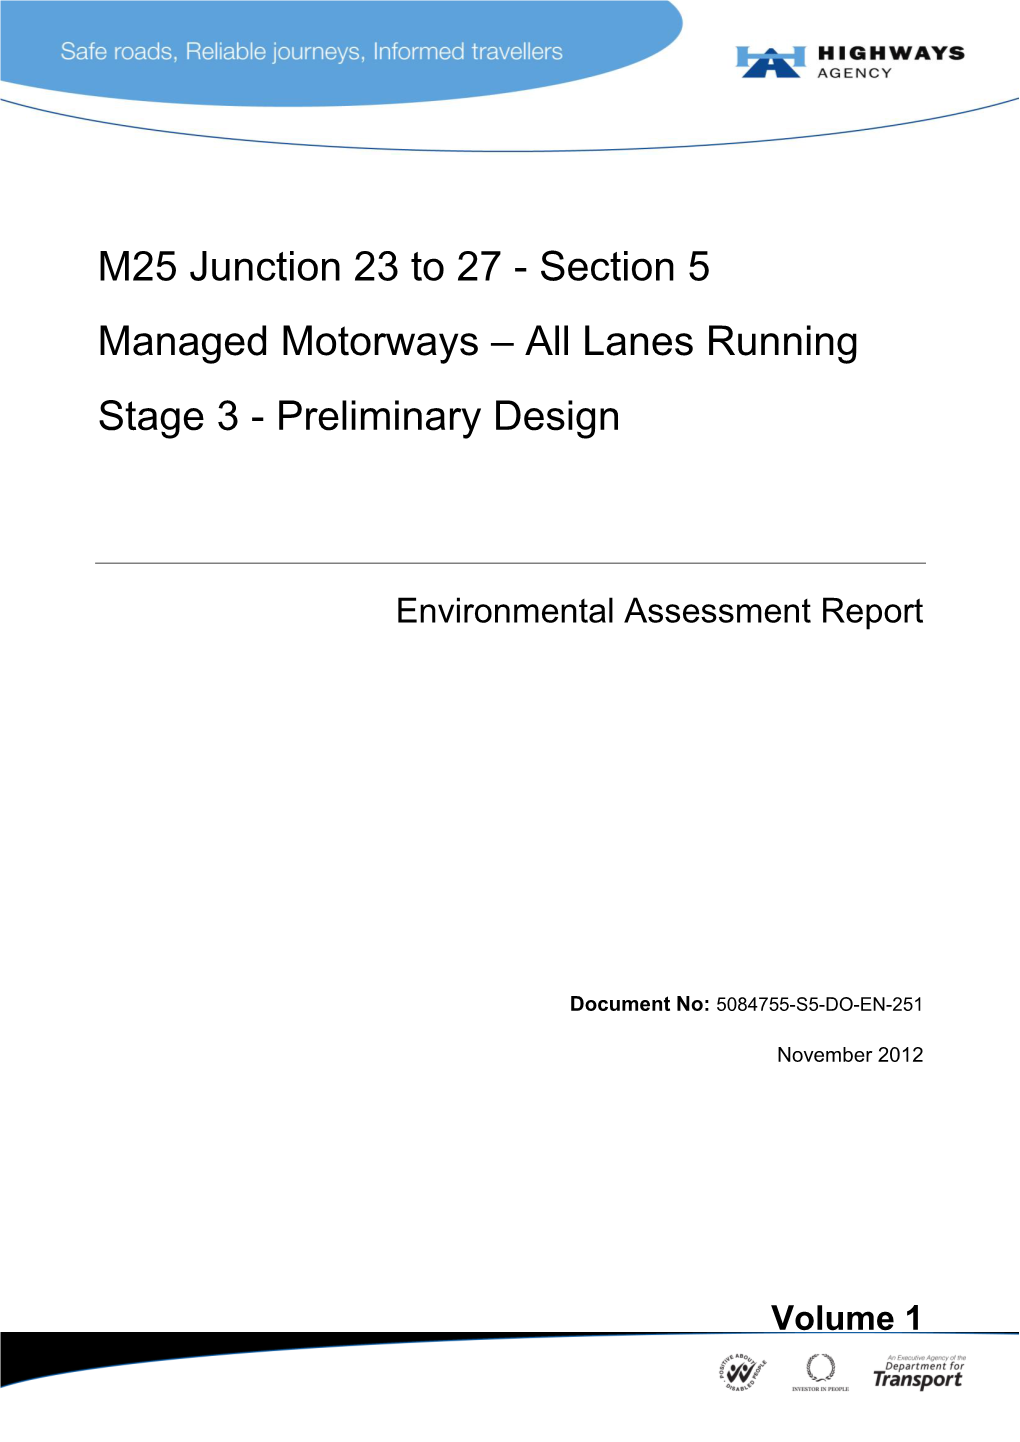 M25 Junction 23 to 27 - Section 5 Managed Motorways – All Lanes Running Stage 3 - Preliminary Design